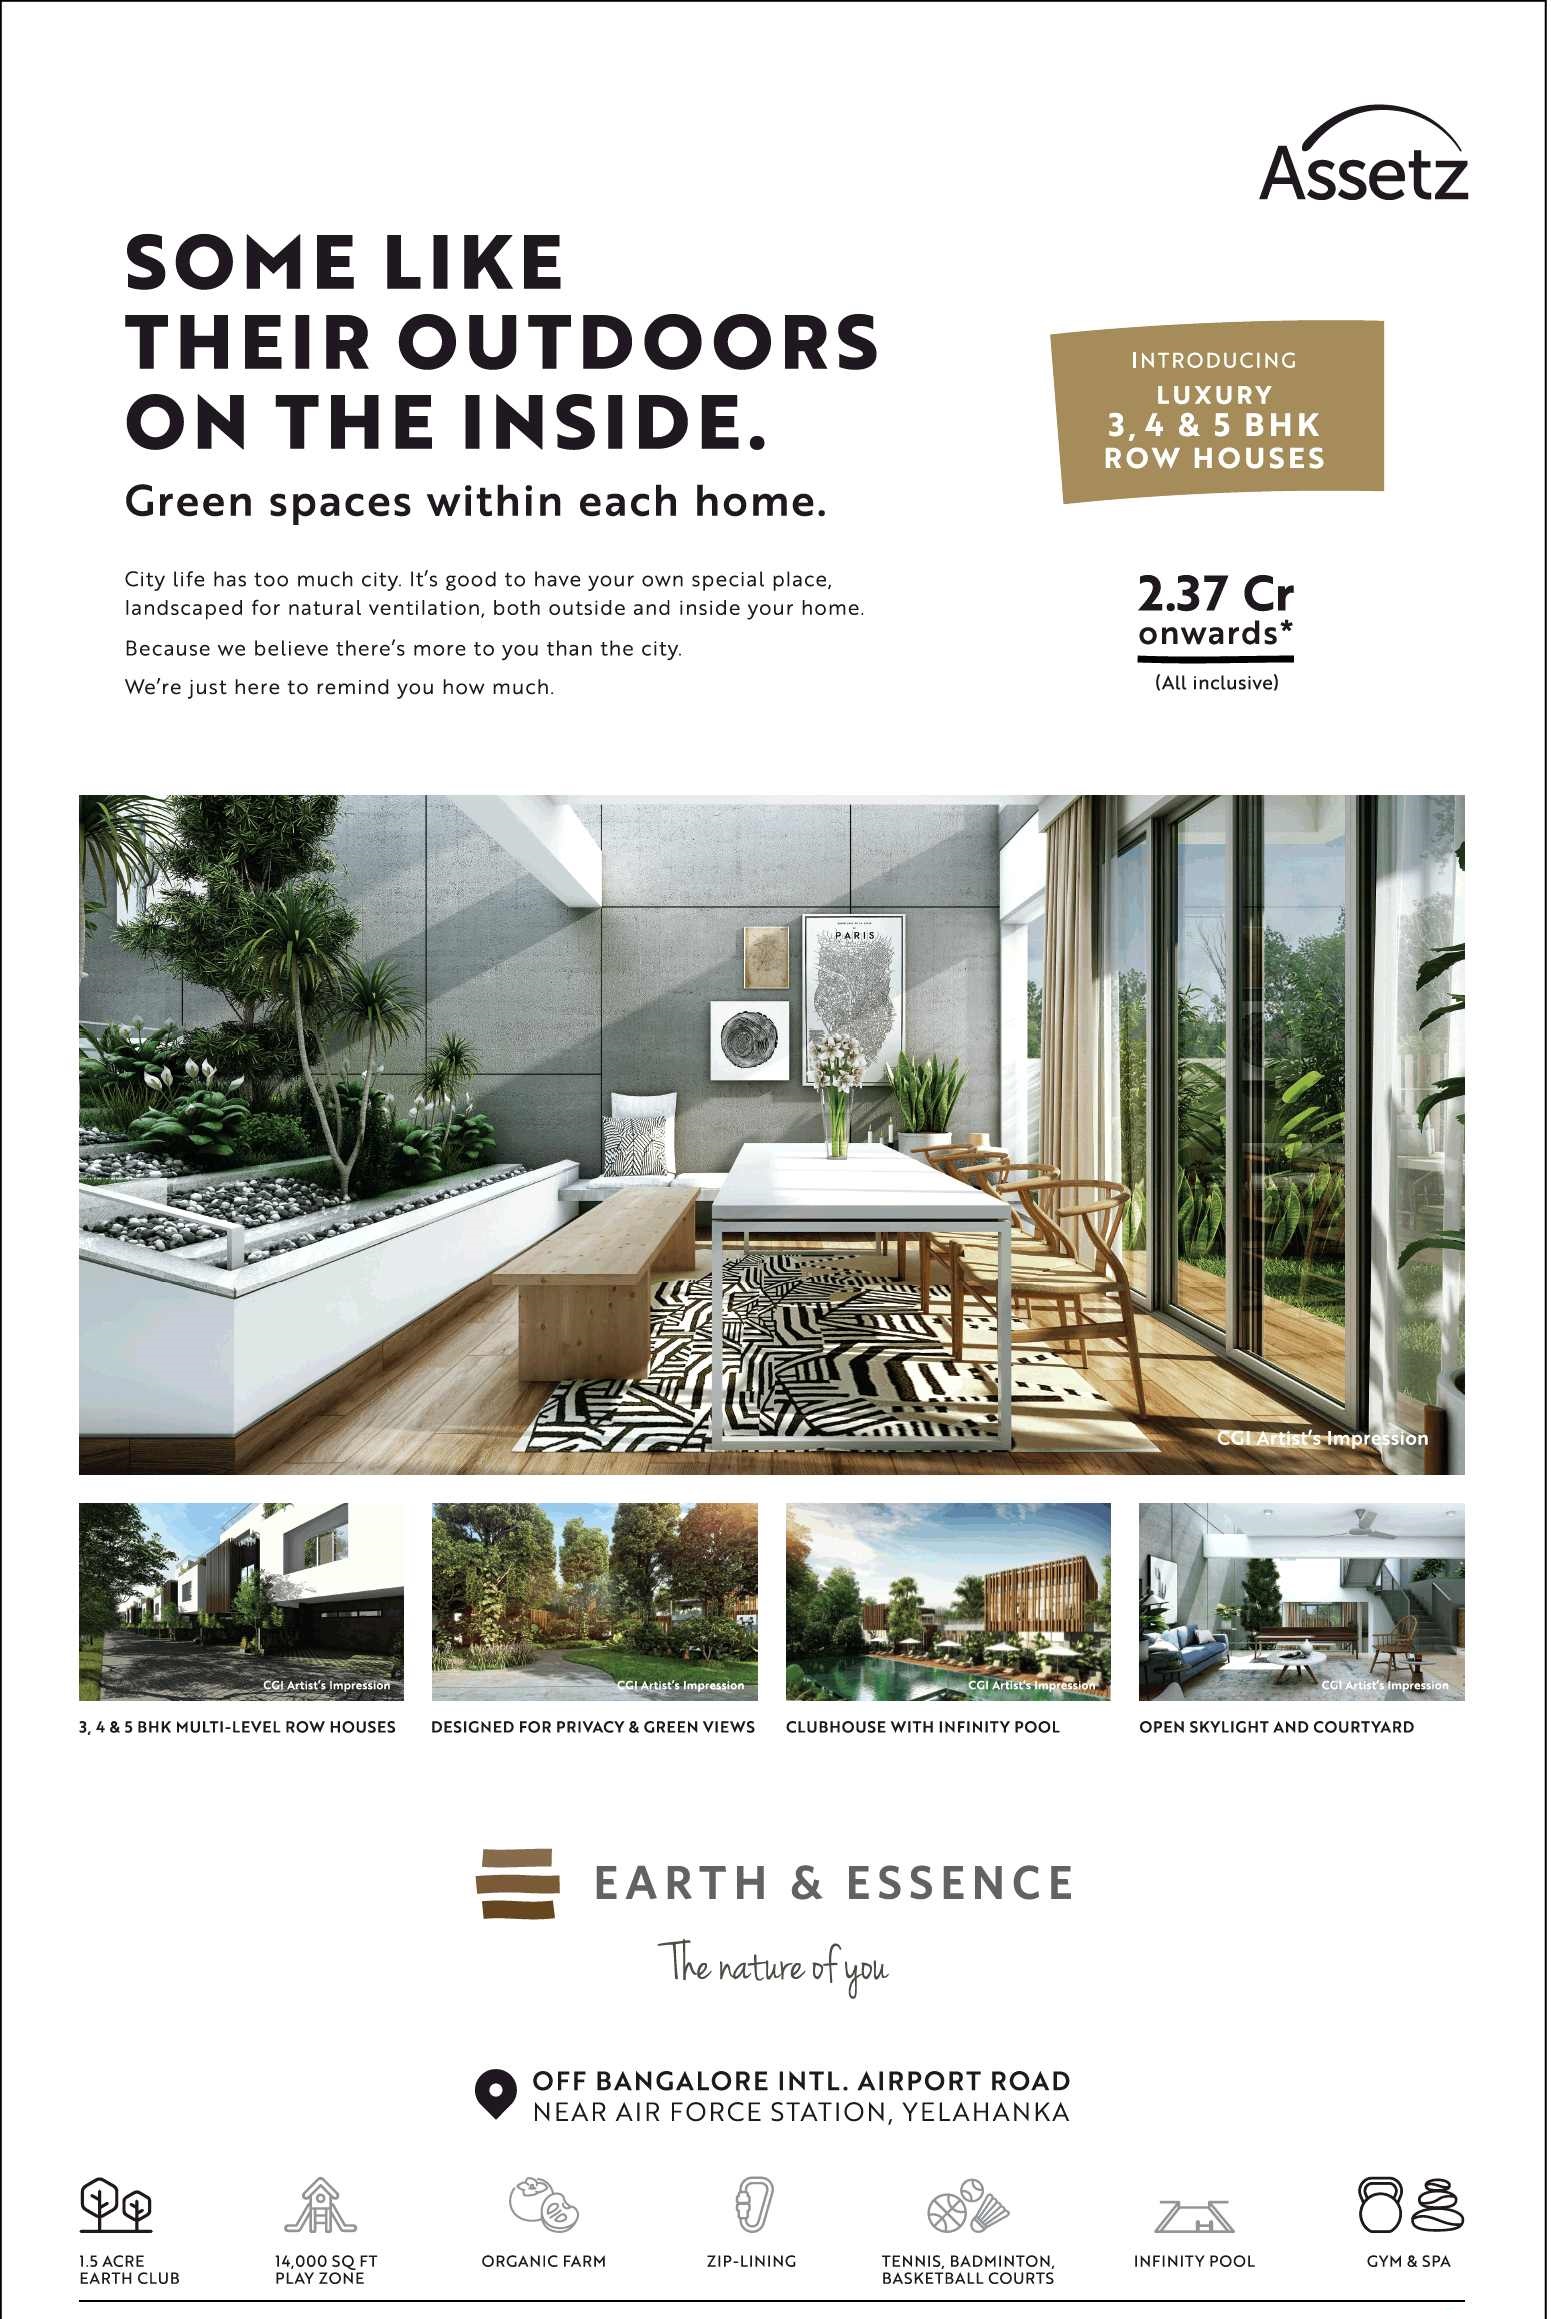 Introducing green spaces in each rooms at Assetz Earth & Essence in Bangalore